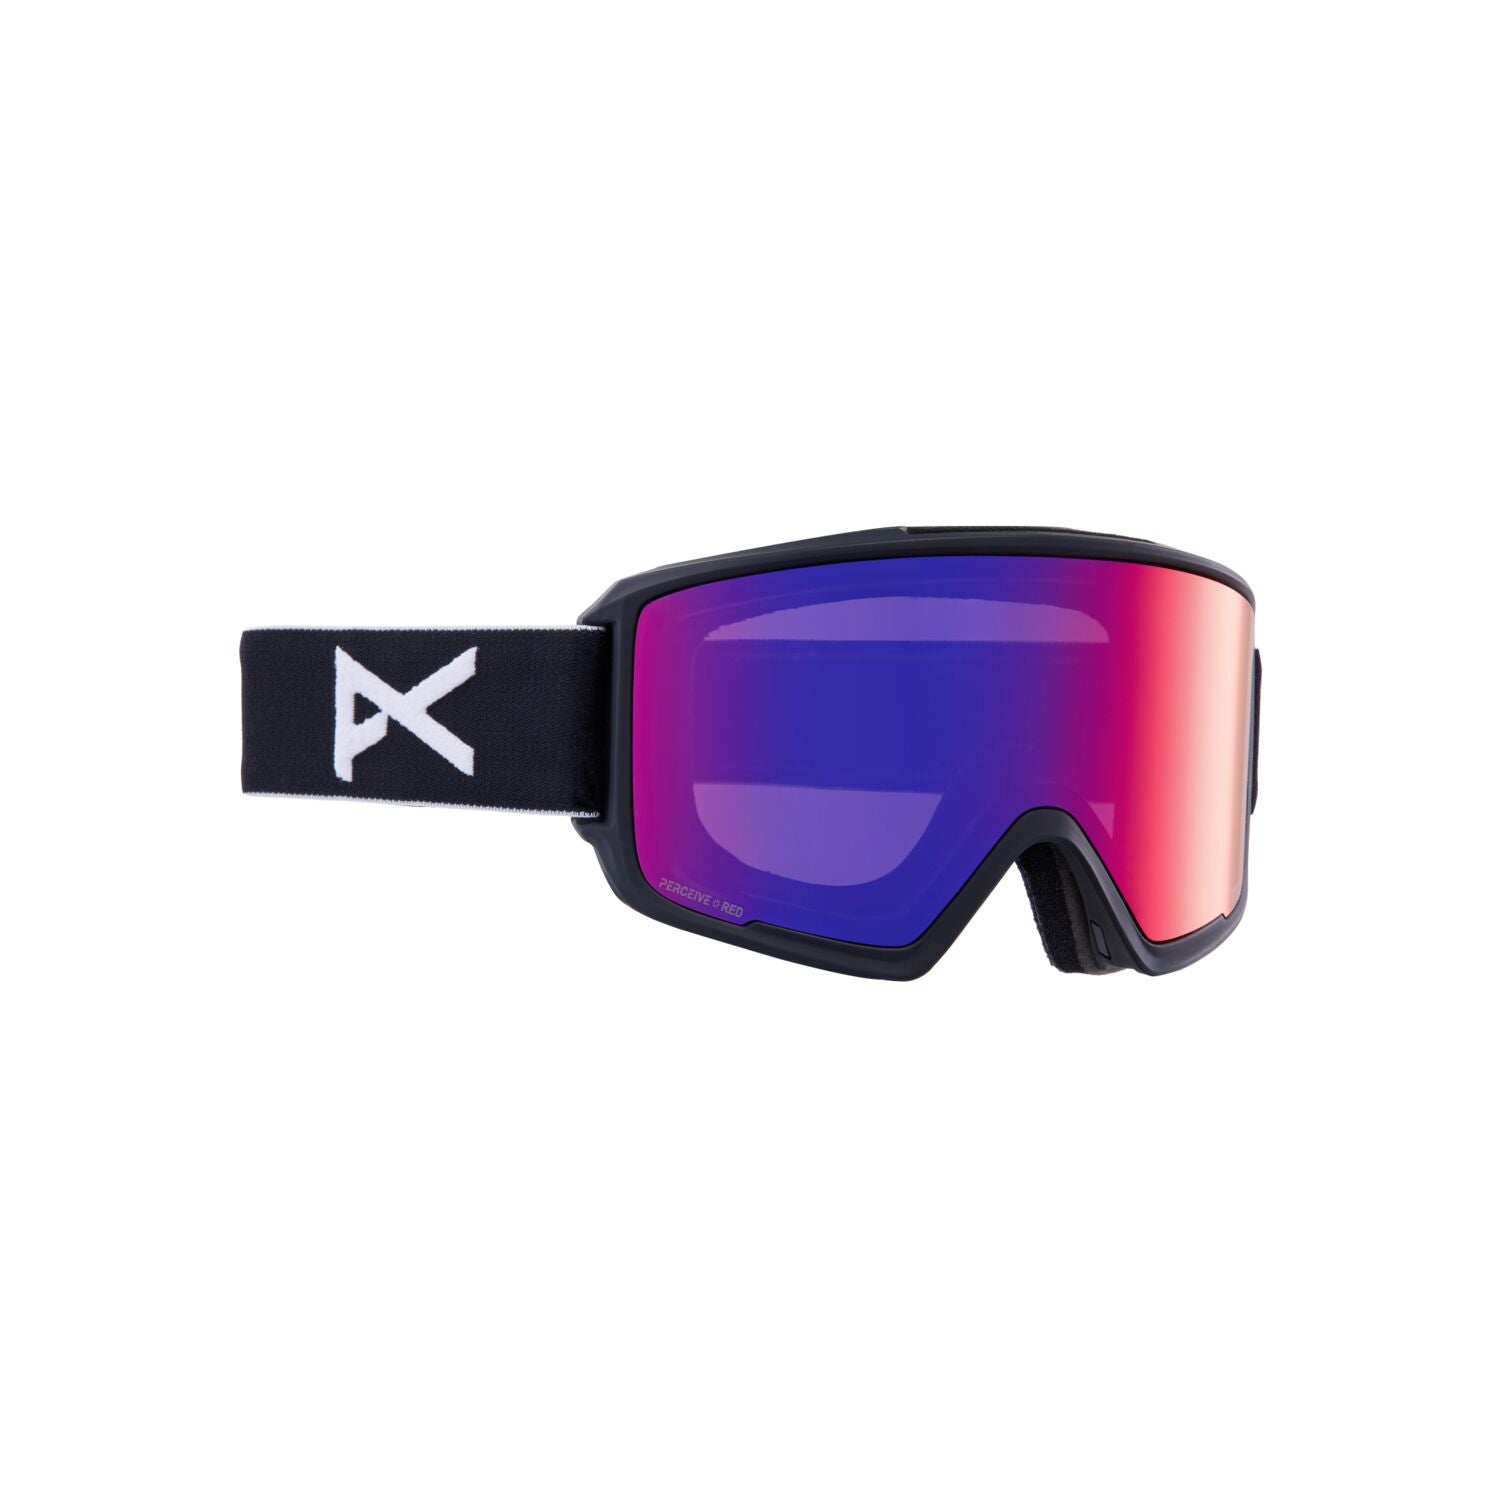 Anon M3 Goggles + Bonus Lens + MFI Face Mask - Low Bridge Fit Black / Perceive Sunny Red / Perceive Sunny Red (14% / S3) Snow Goggles